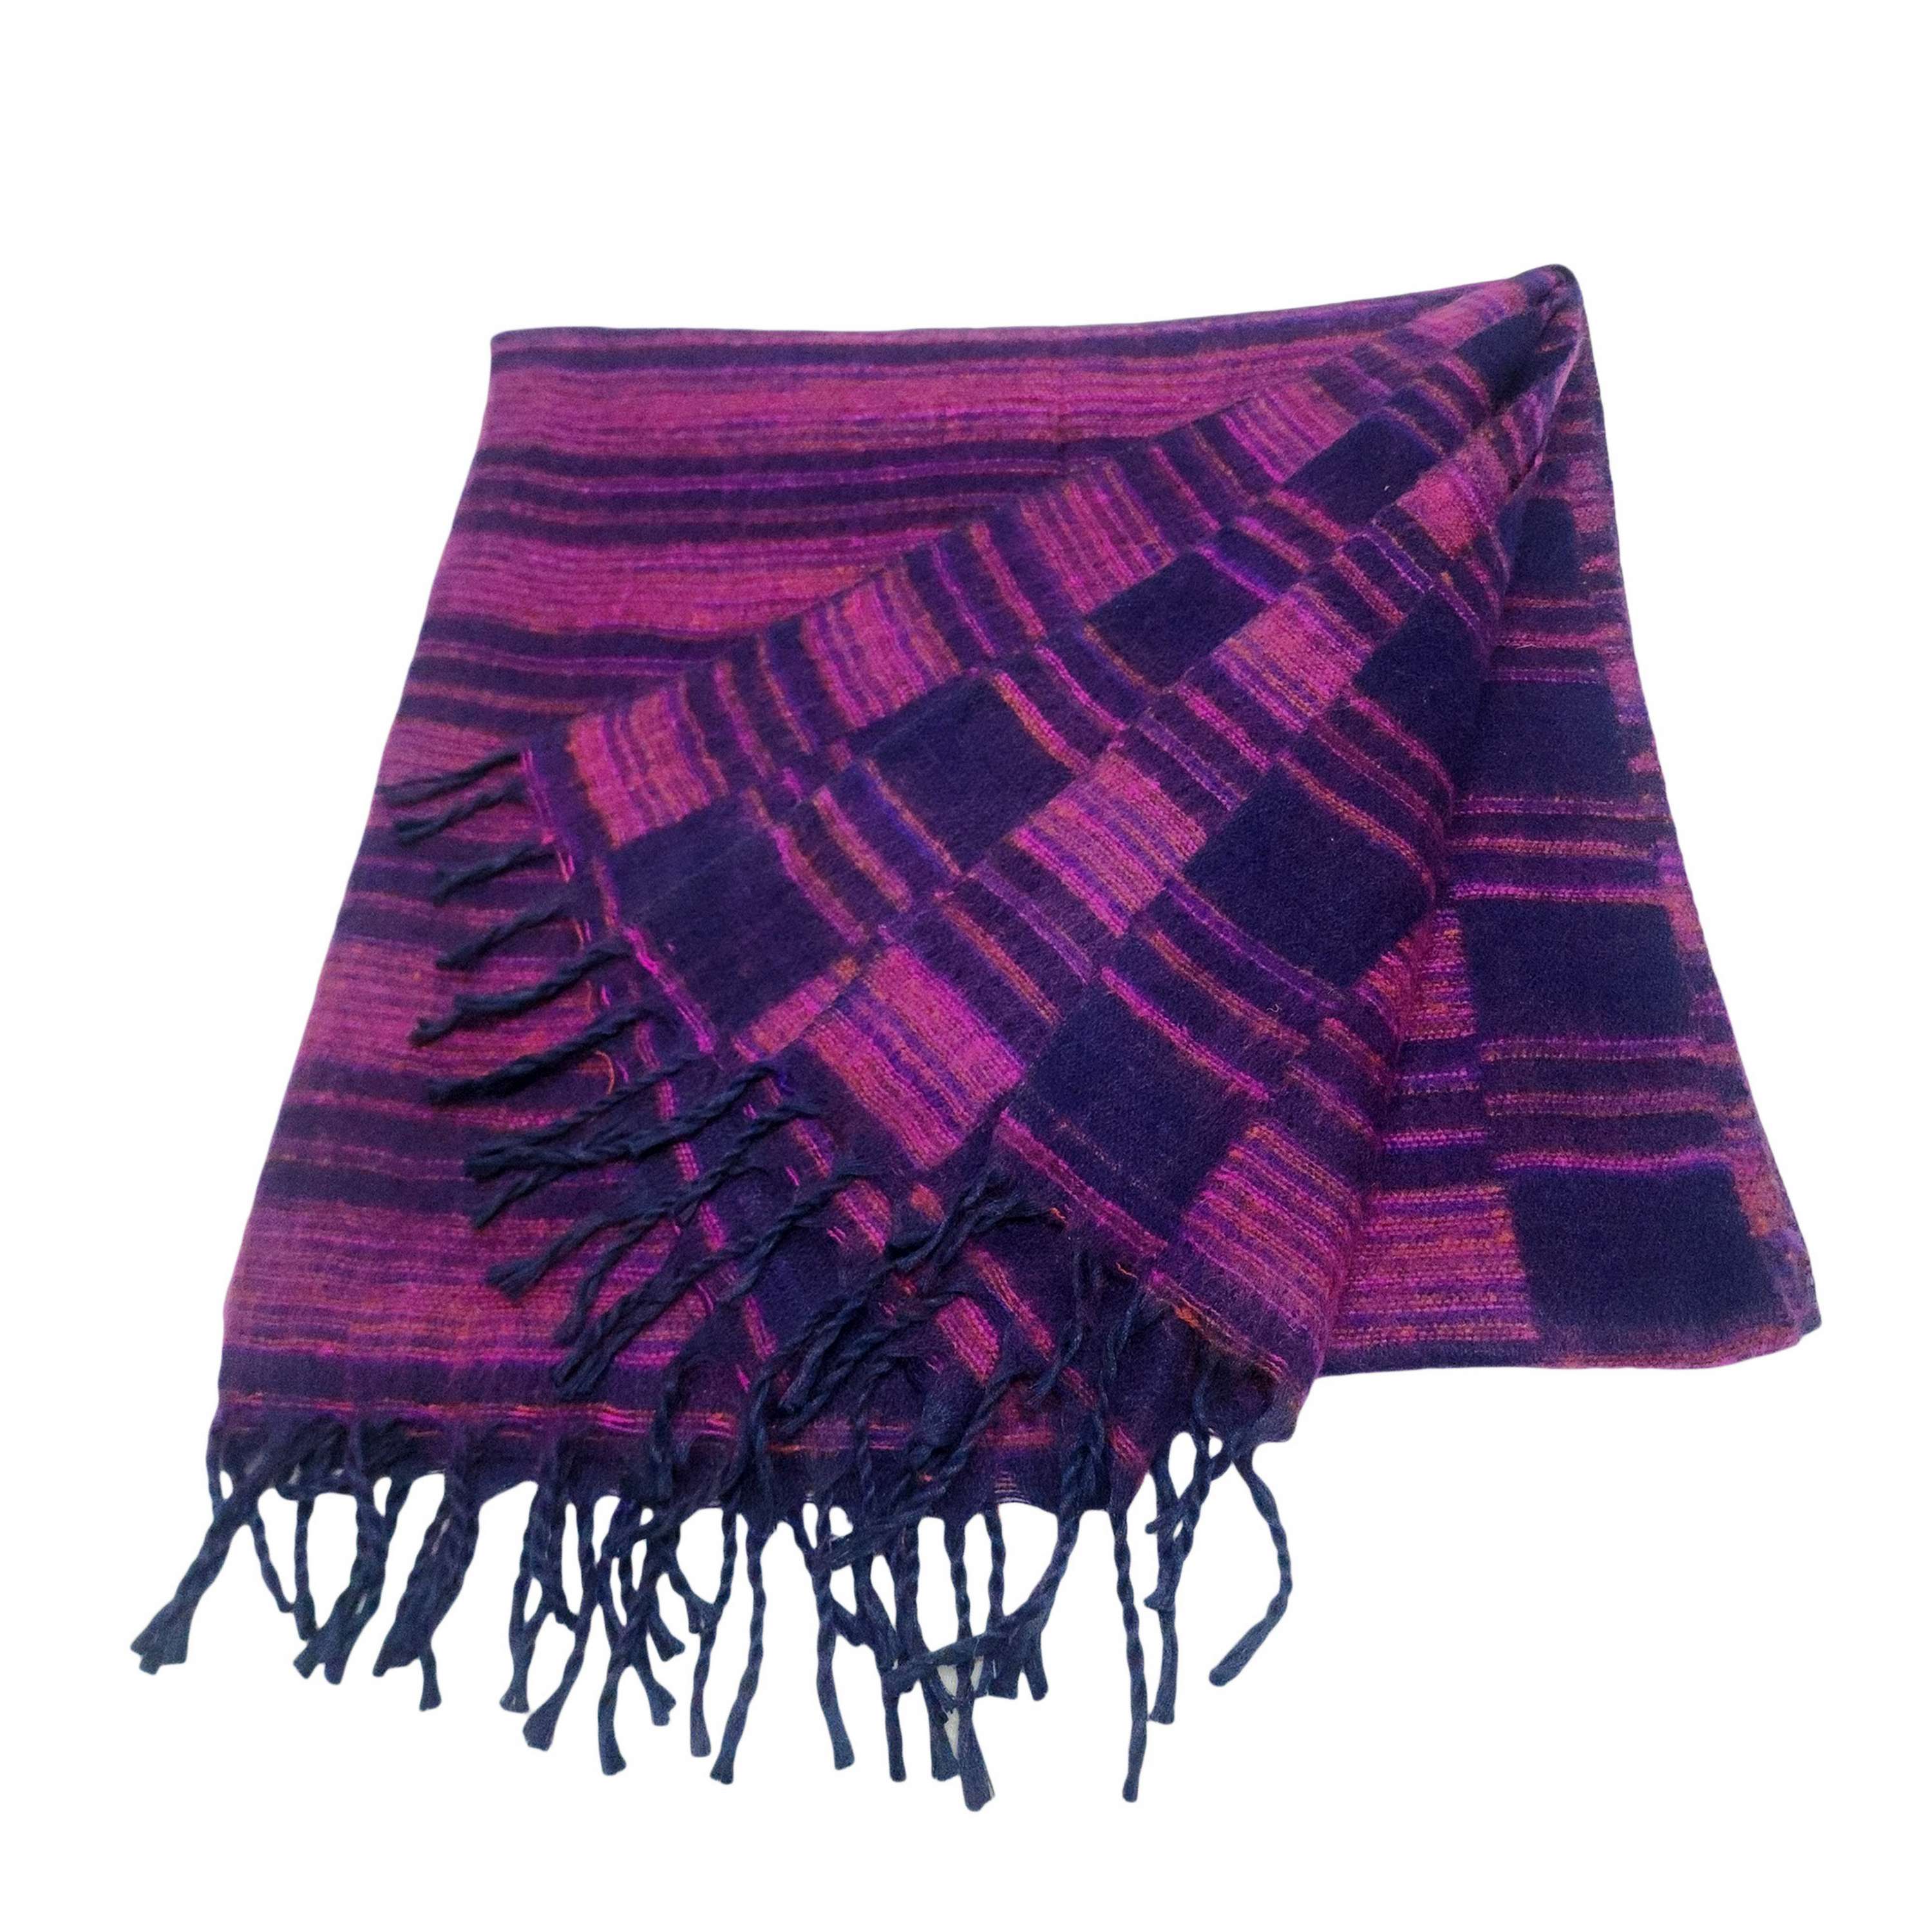 Tibet Shawl, Feel The Warmth: Acrylic Woolen Shawls For Cold Winter Days In Midnight Purple Color <span Style=